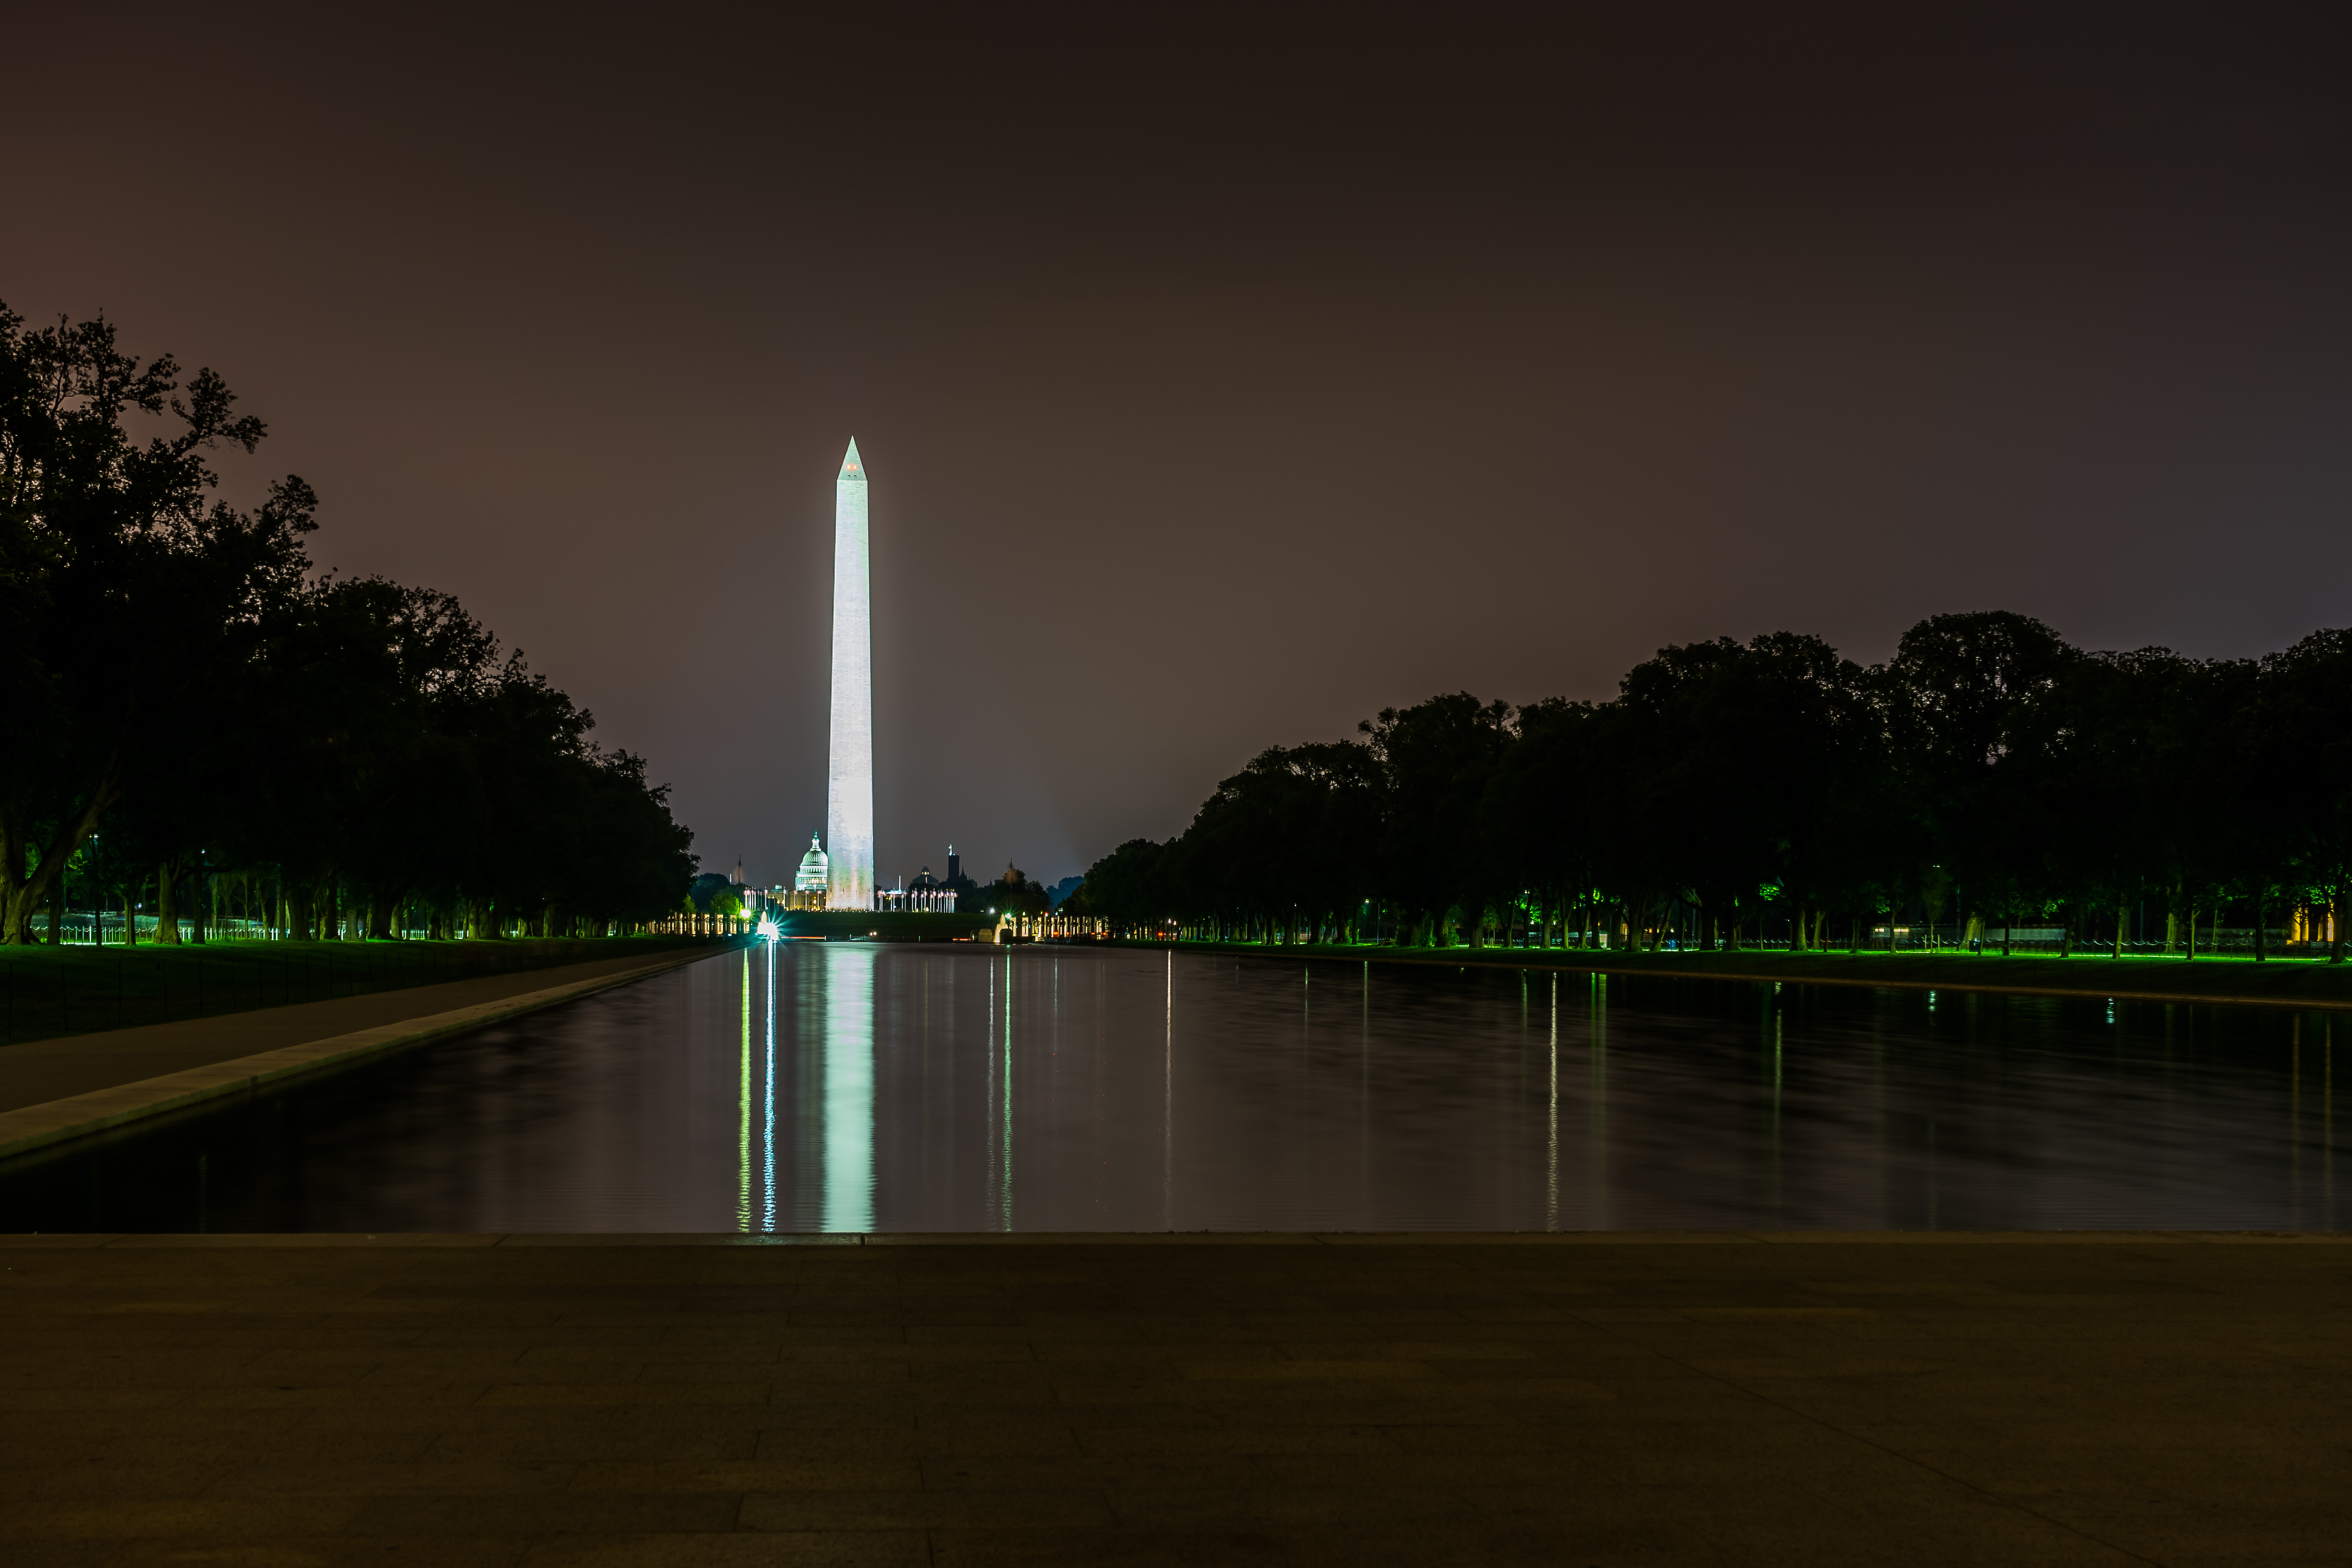 a large monument lit up at night